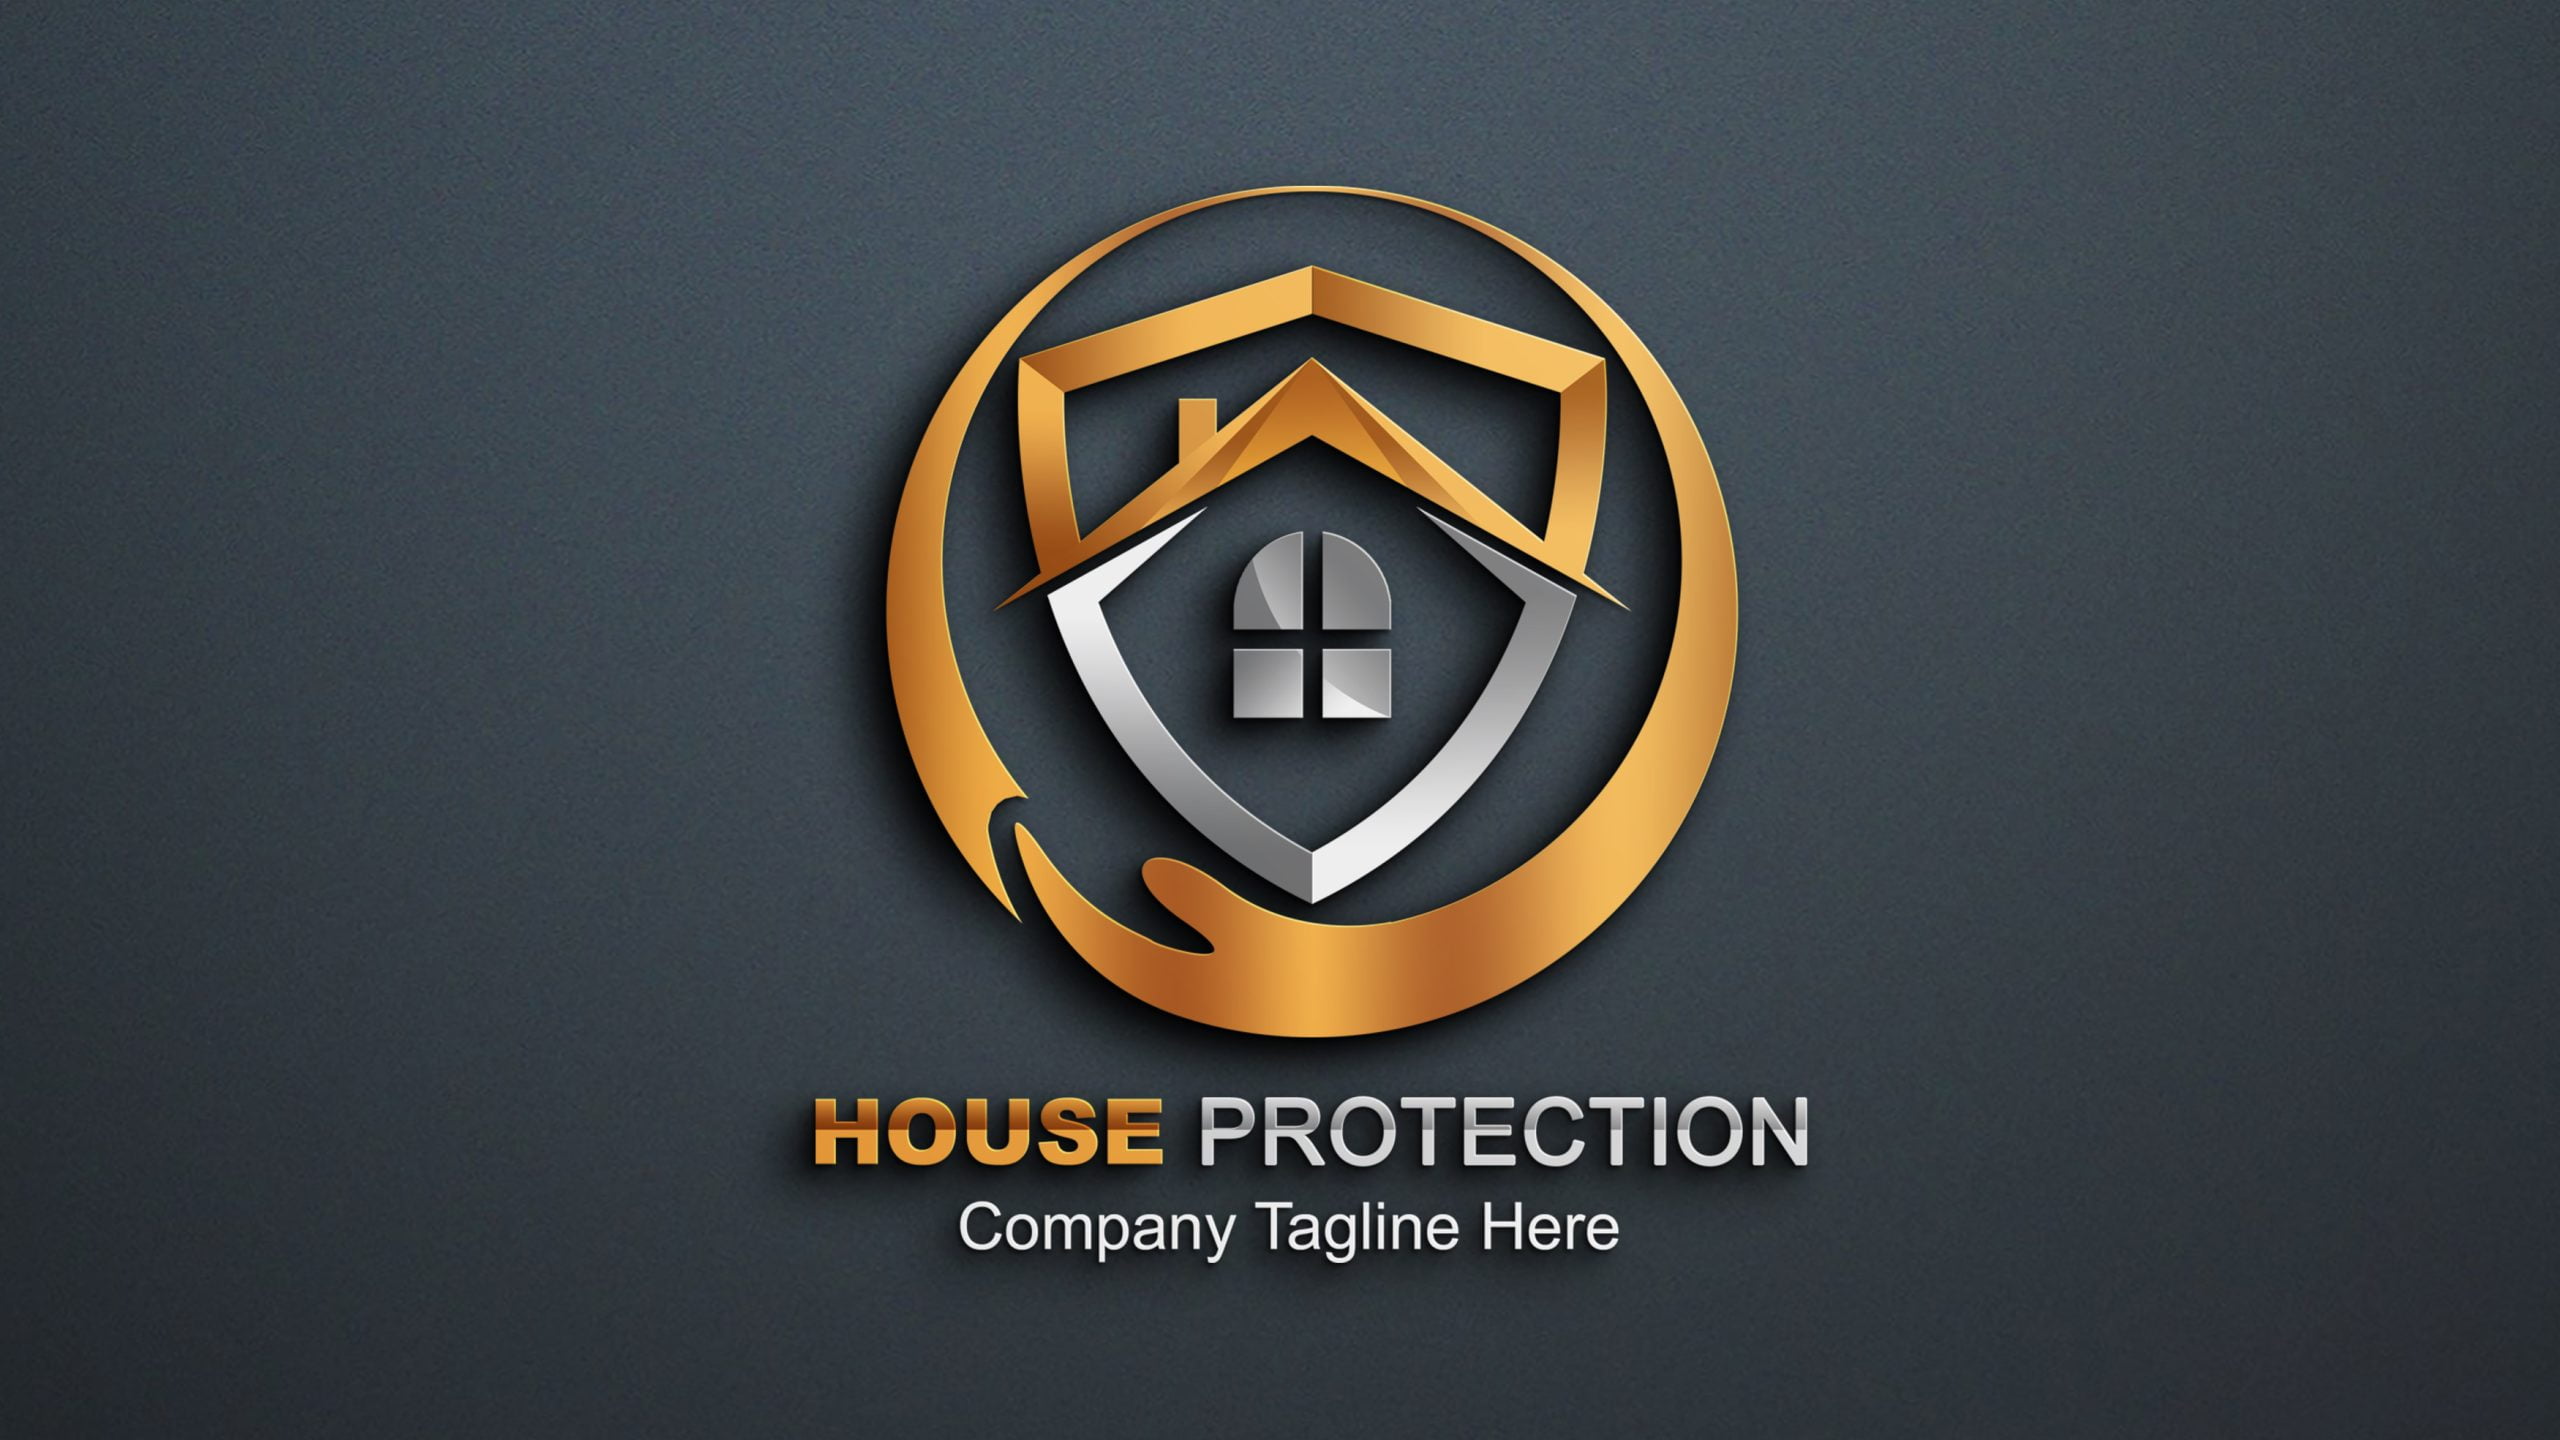 House Protection Logo Template